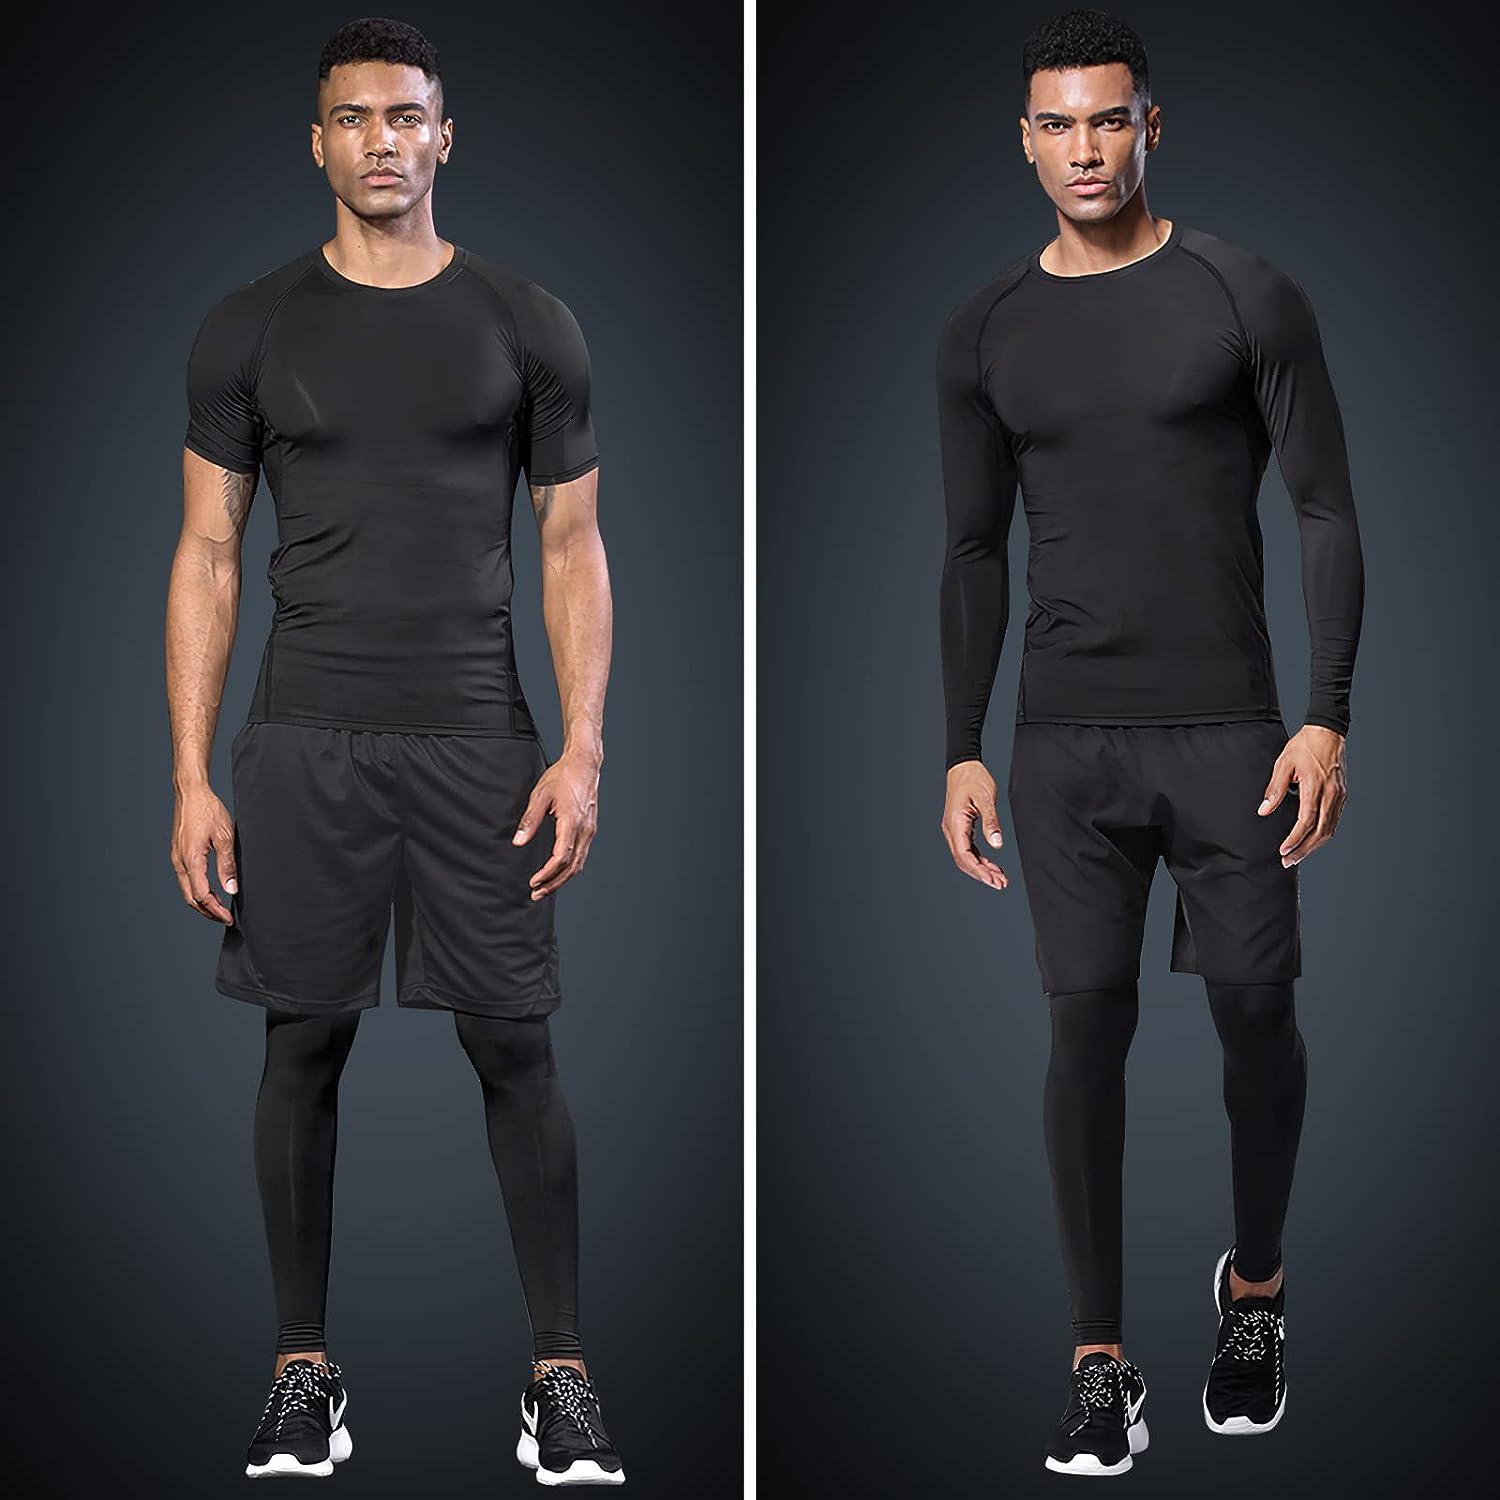 Gym Exercise Fitness Clothing for Men's Compression Sportswear Suits Black  Running Tracksuit Set Jogging Training Tights Dry Fit